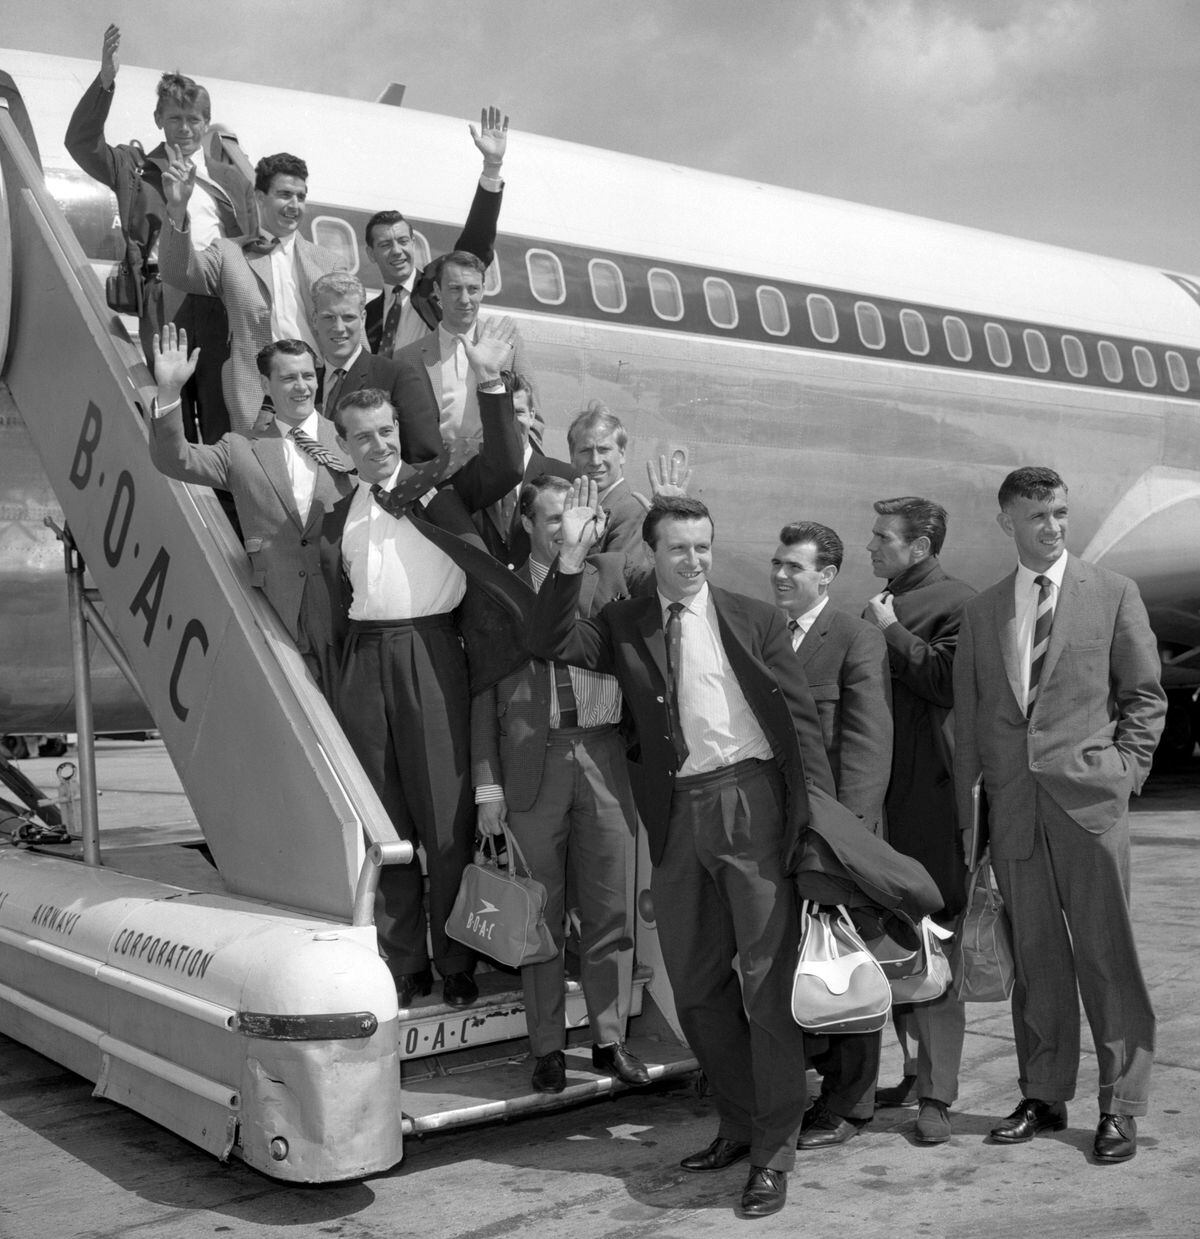 England's World Cup footballers wave before leaving London Airport. From top: Gerry Hitchins, Stan Anderson, Johnny Haynes, Ron Flowers (left), Jimmy Greaves (right), Bobby Robson, Peter Swan, Ron Springett (face hidden), Bobby Charlton, Ray Wilson (face hidden), Jimmy Armfield, John Connolly, Alan Peacock and Bobby Smith.